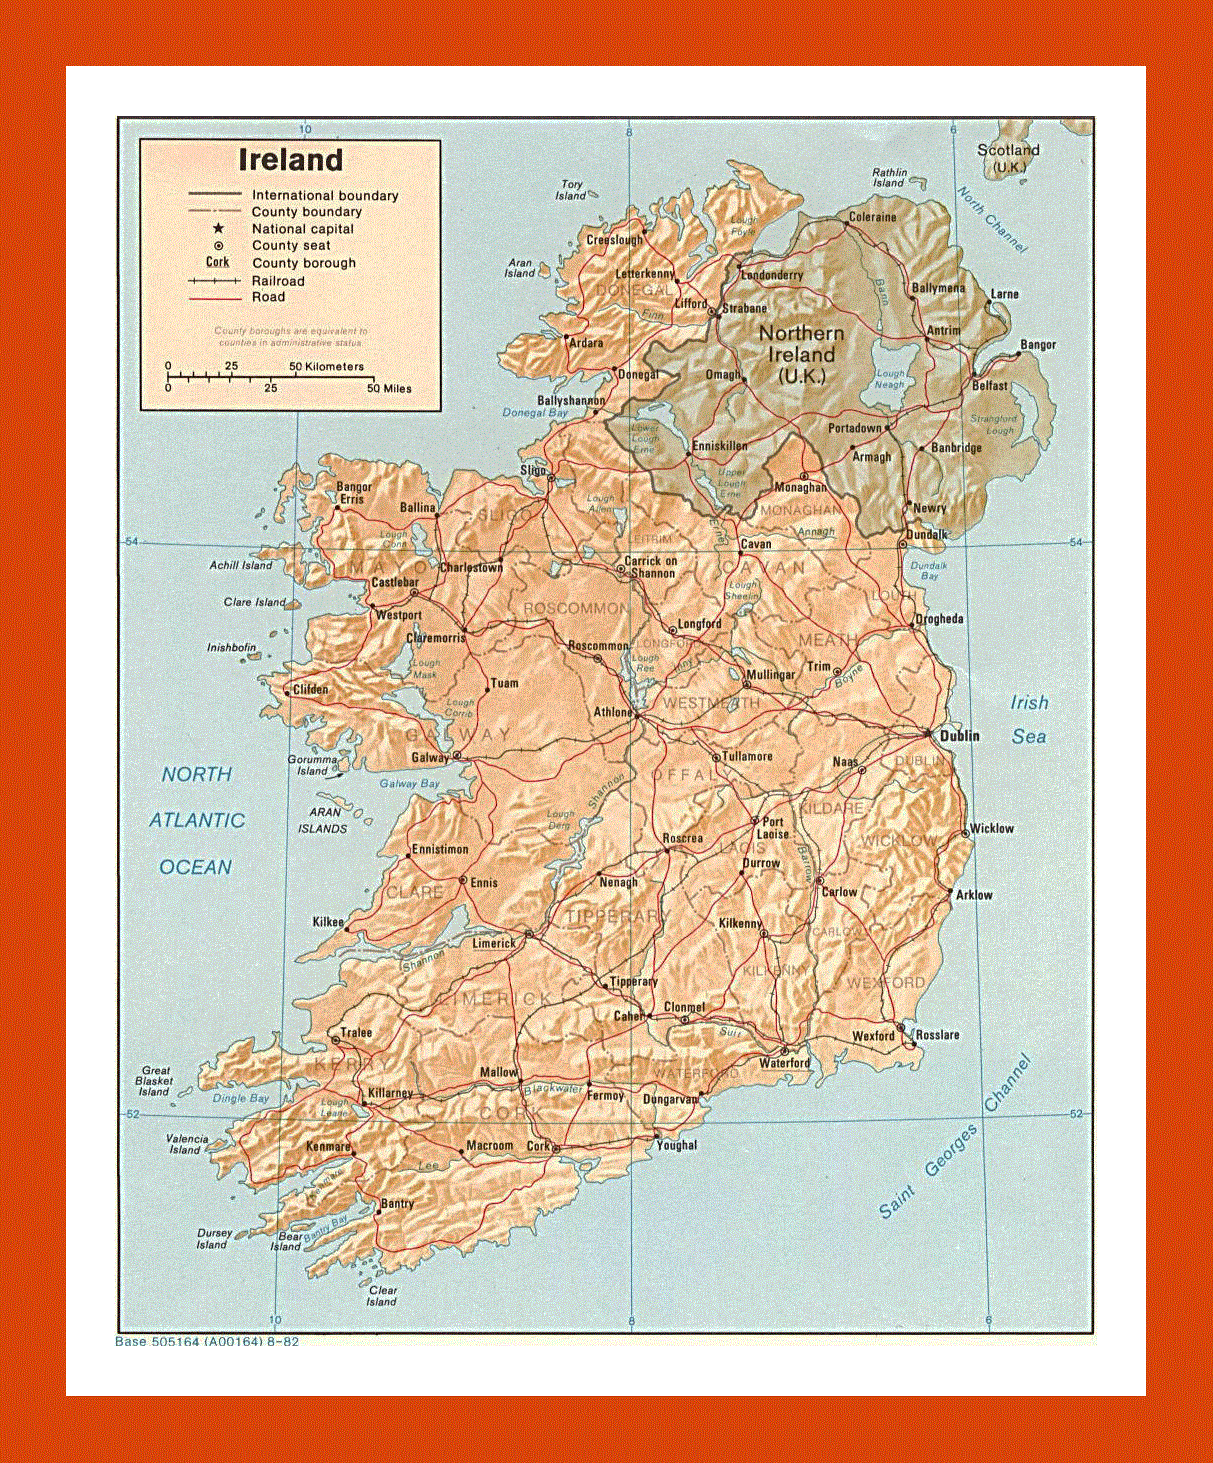 Political and administrative map of Ireland - 1982